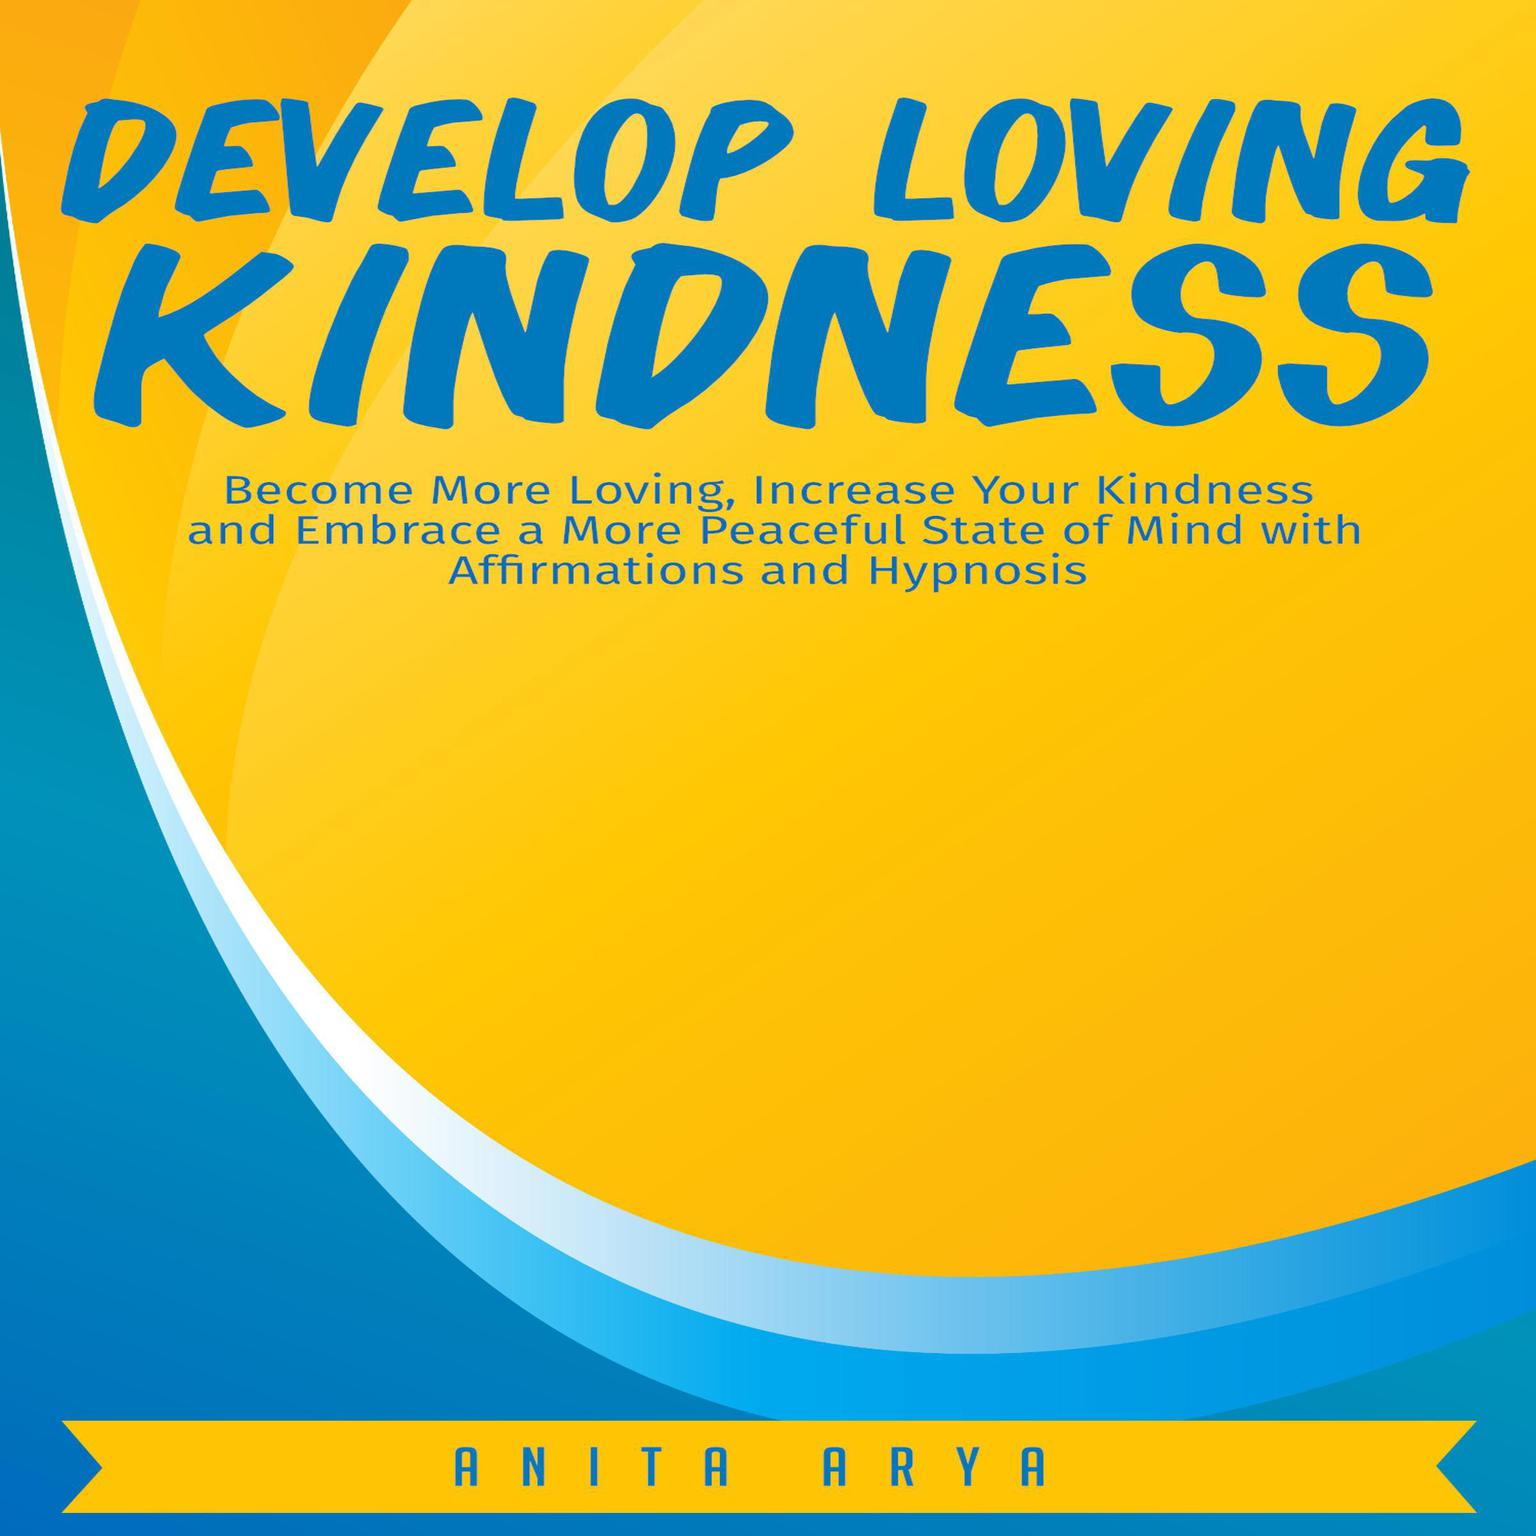 Develop Loving Kindness: Become More Loving, Increase Your Kindness and Embrace a More Peaceful State of Mind with Affirmations and Hypnosis Audiobook, by Anita Arya  